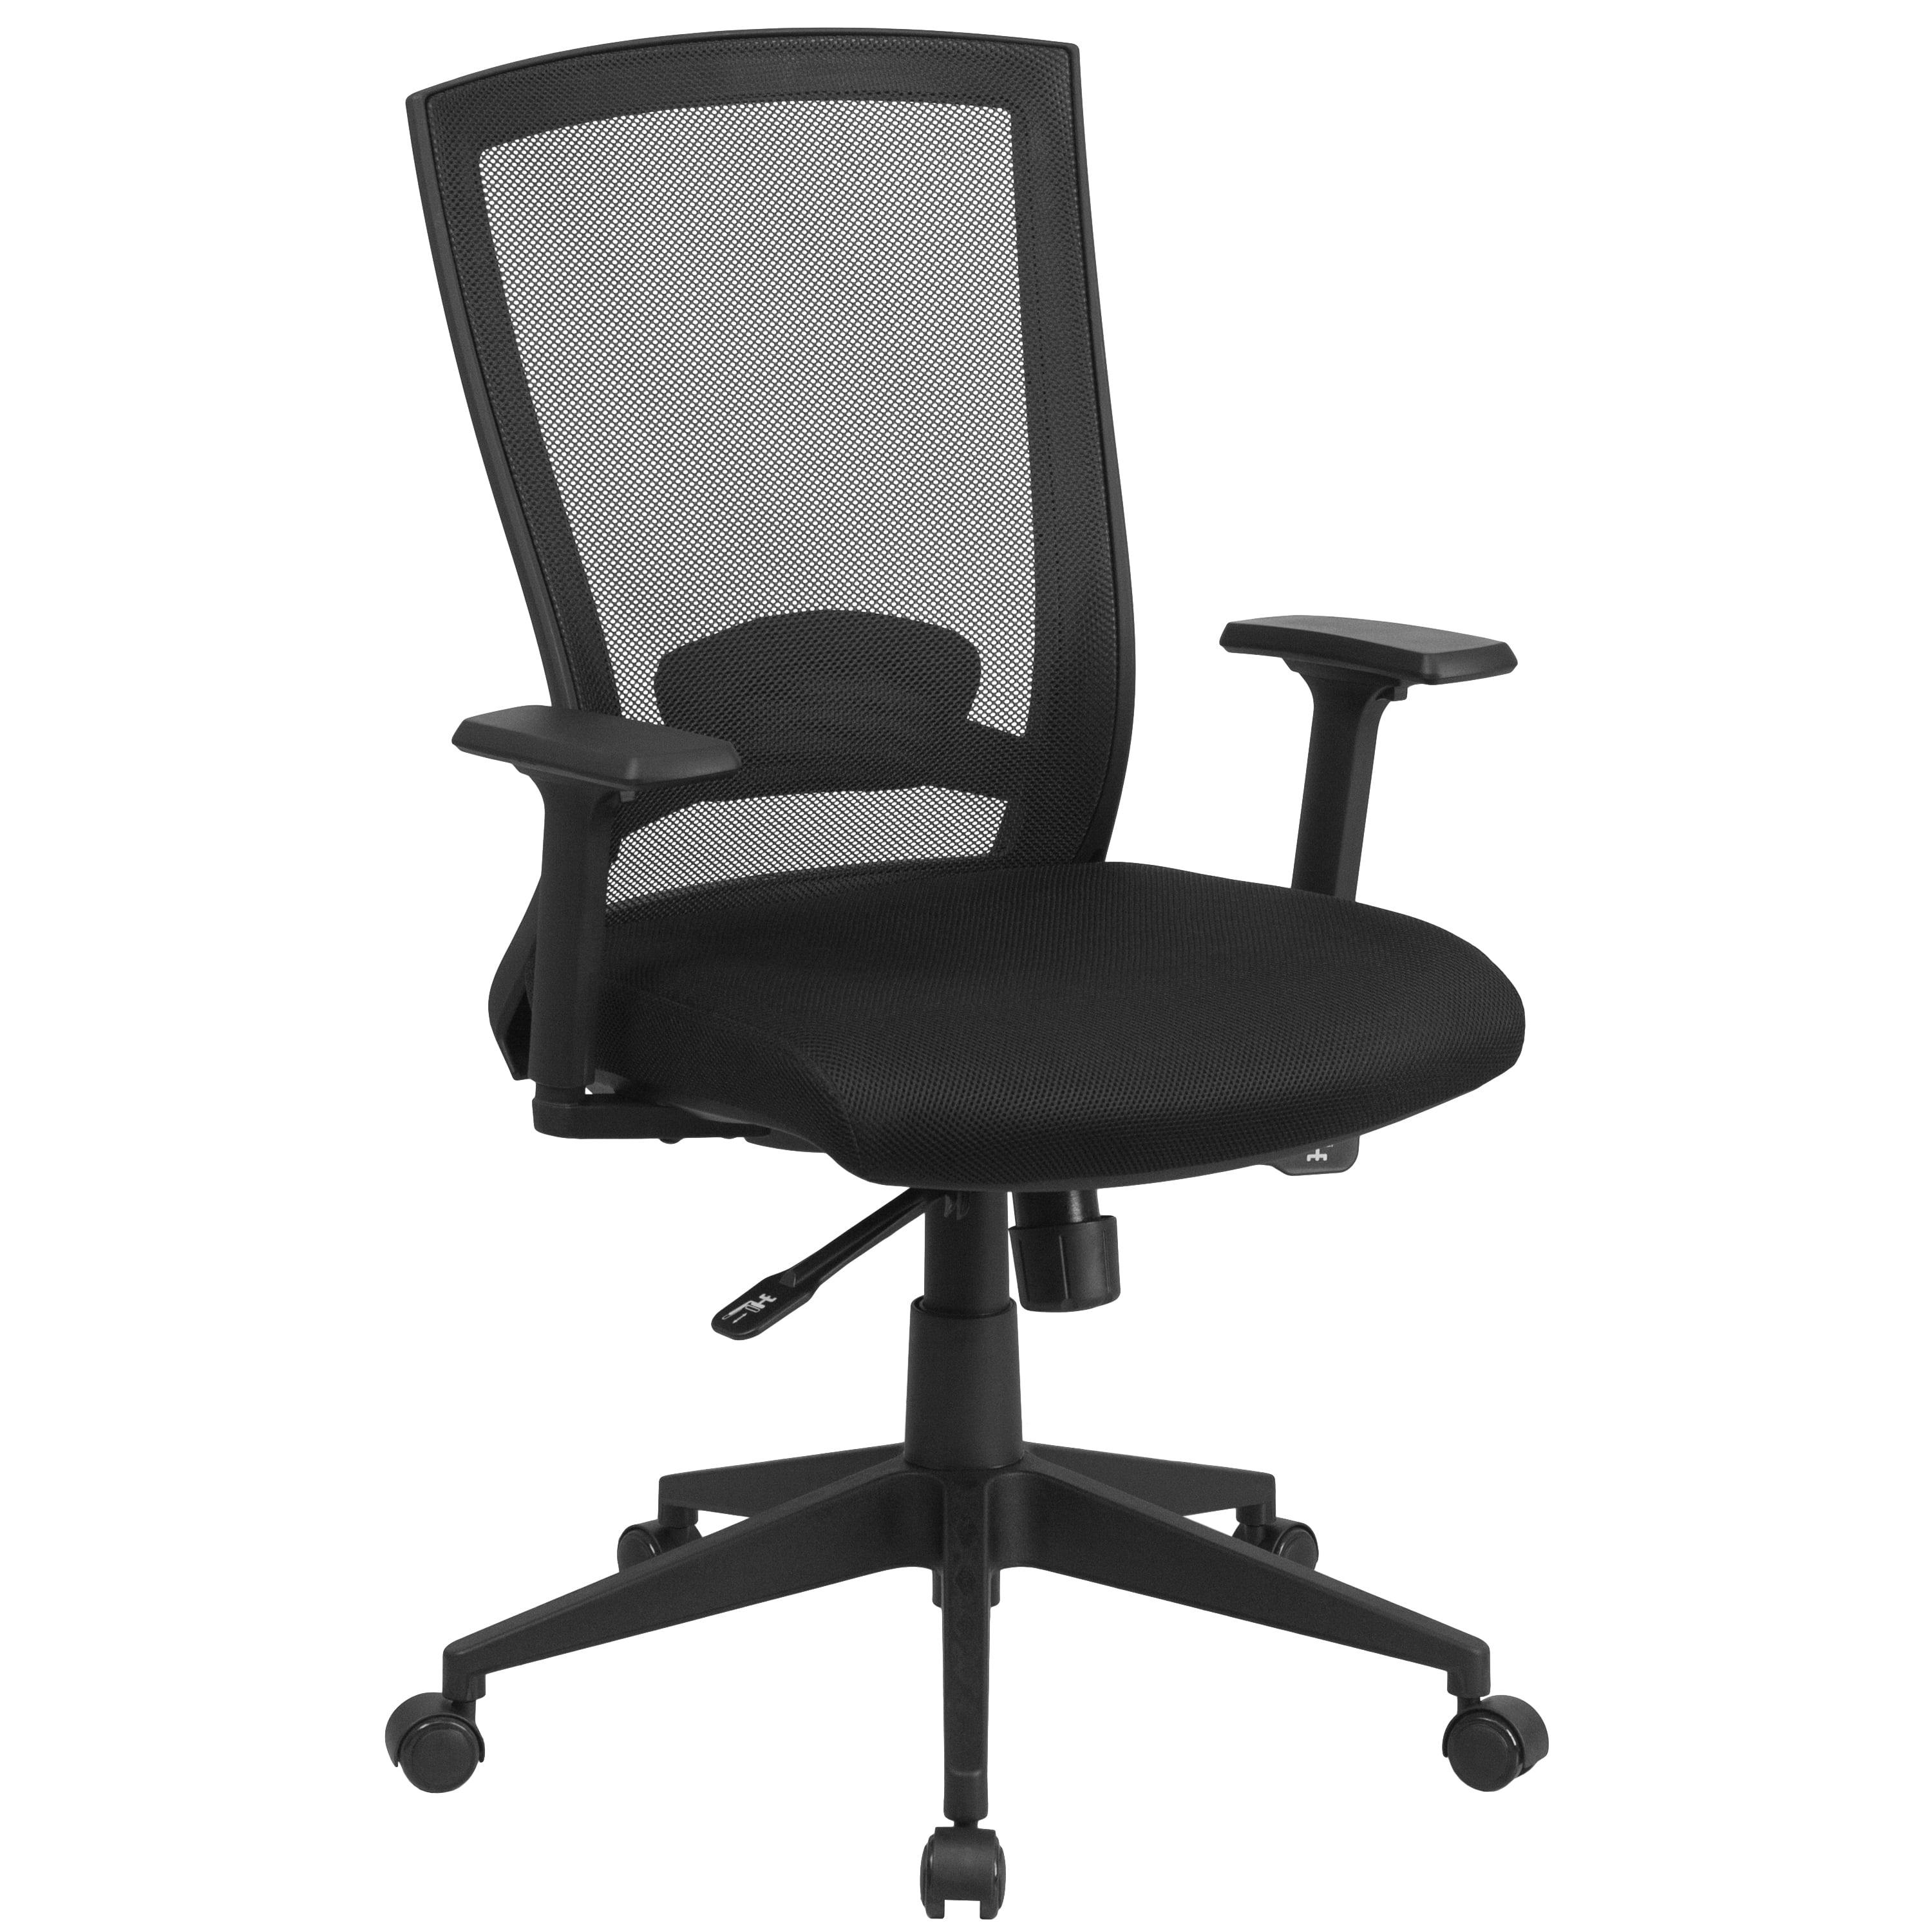 ErgoFlex Mid-Back Black Mesh Swivel Executive Office Chair with Adjustable Arms